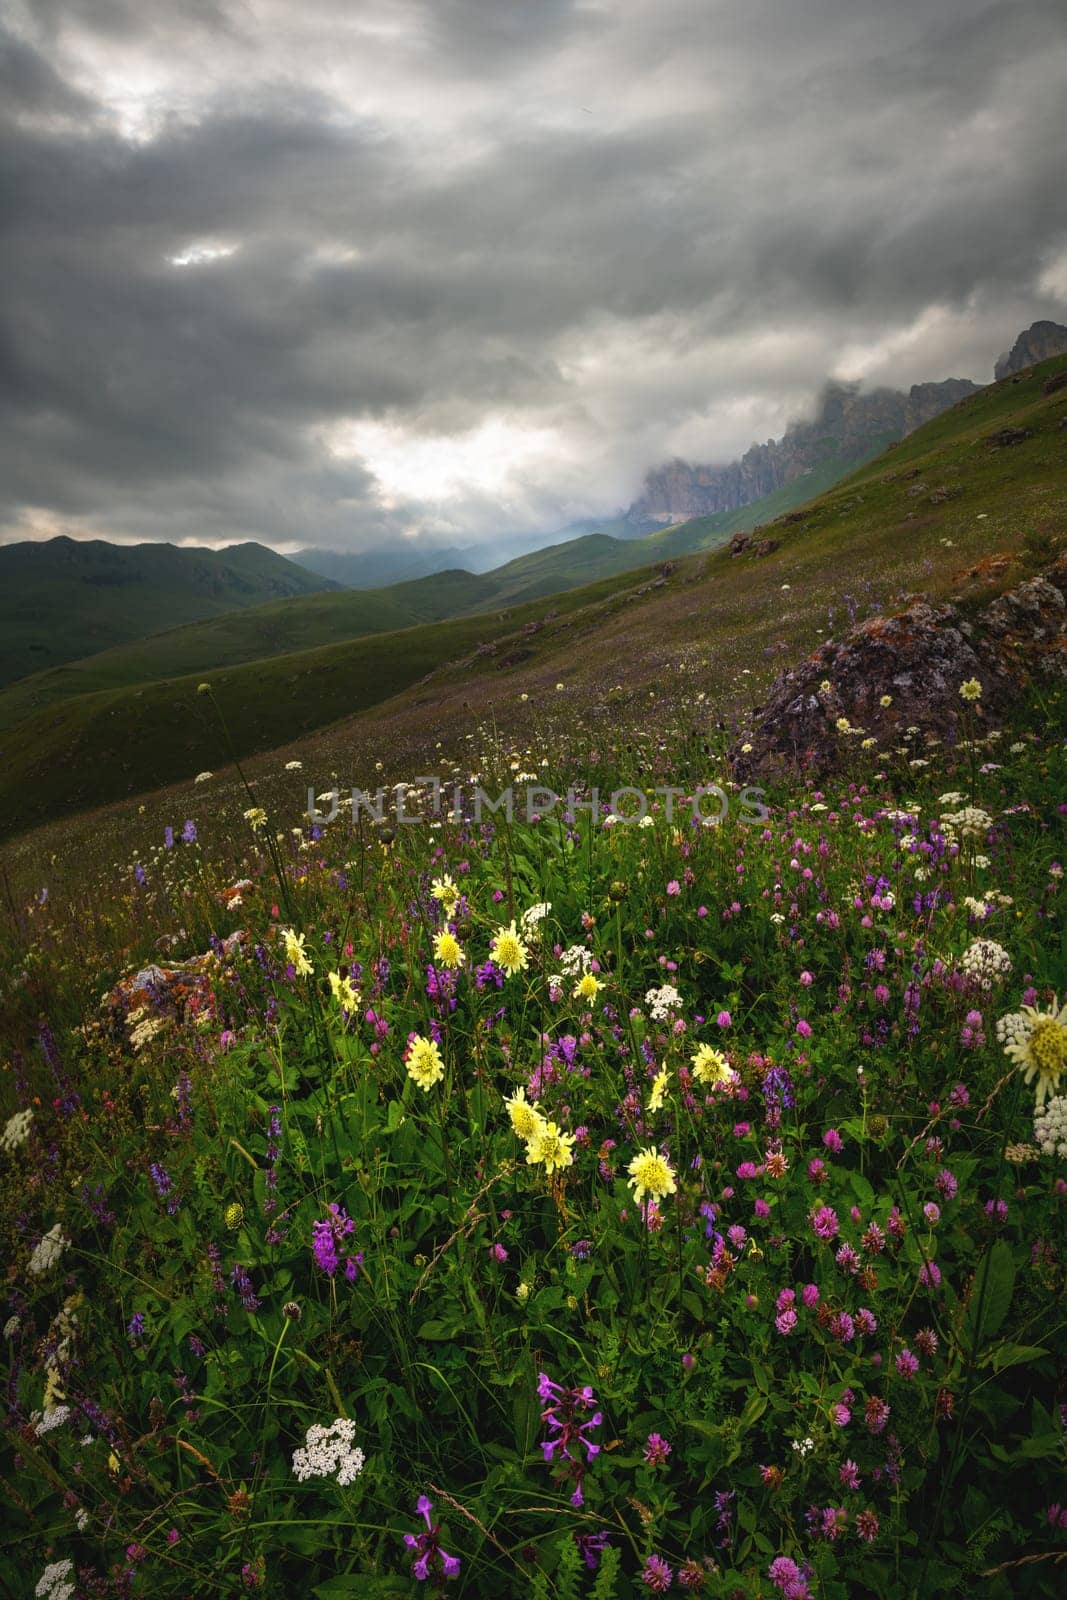 Daytime landscape in the mountains where plants bloom beautifully. Magnificent view of beautiful flowers on a sunny day. The picturesque landscape of an amazing natural place. Discover the beauty of the earth.